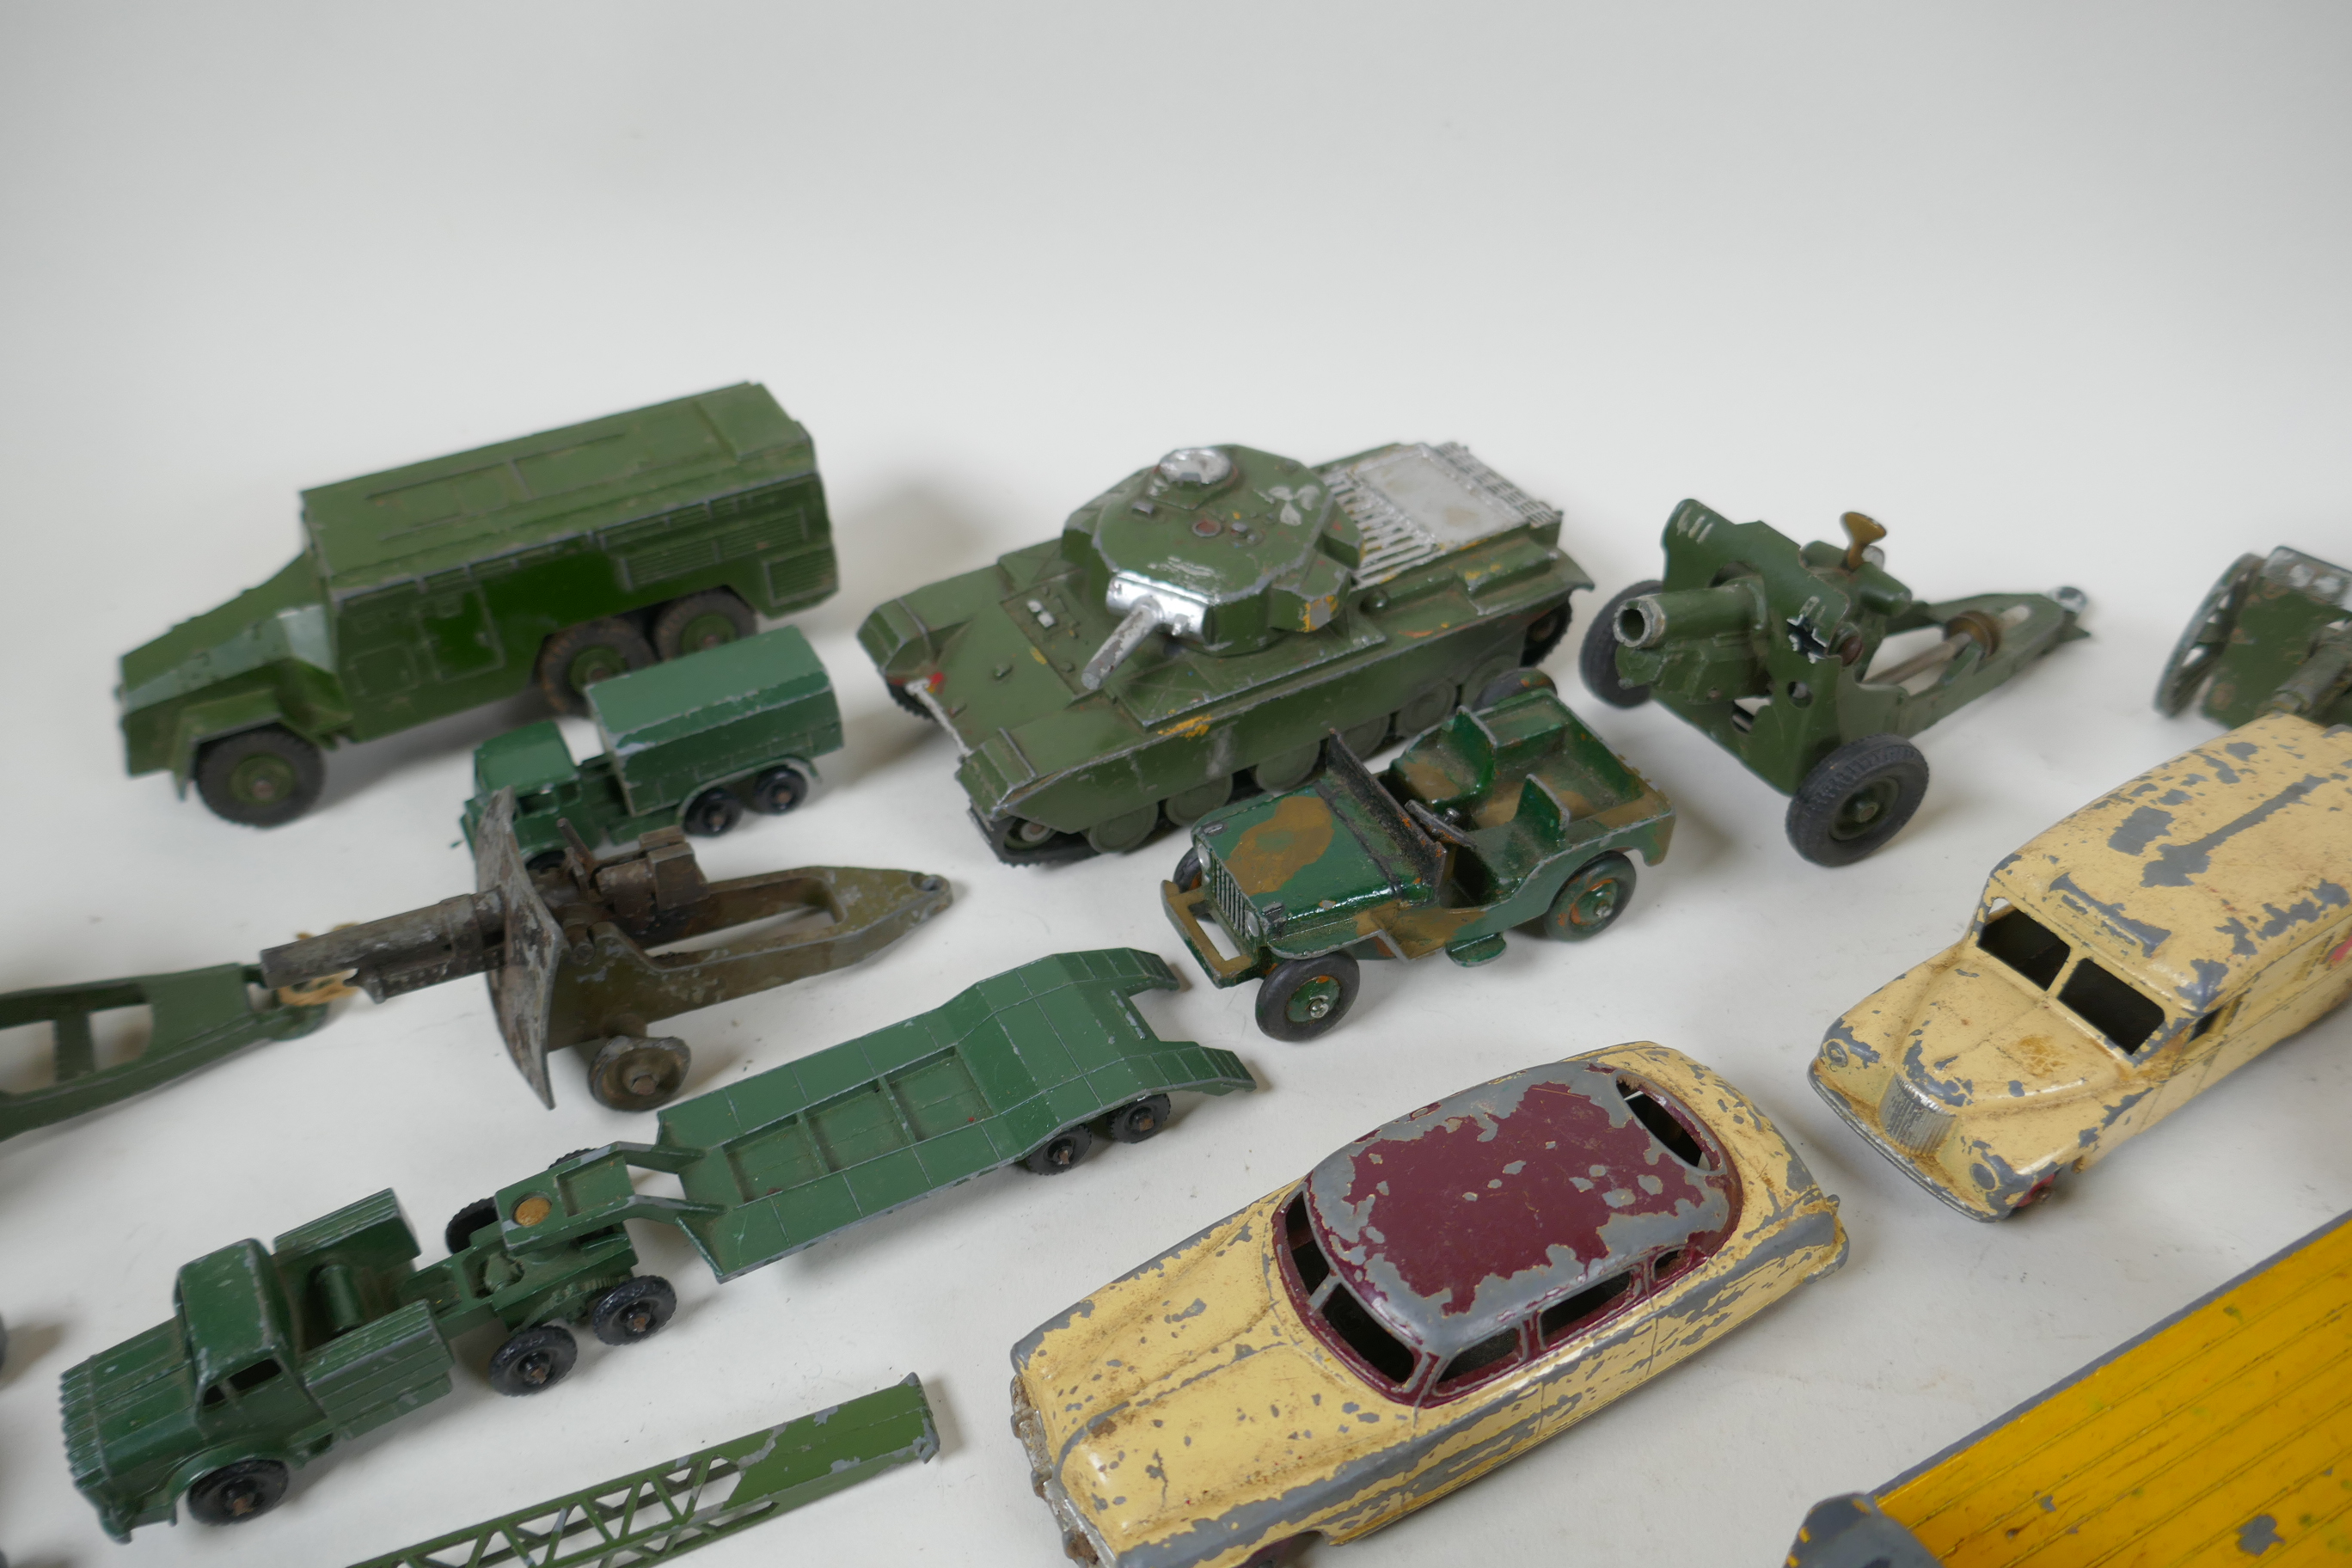 A collection of vintage die cast metal cars, trucks, military vehicles and farming vehicles, - Image 4 of 9